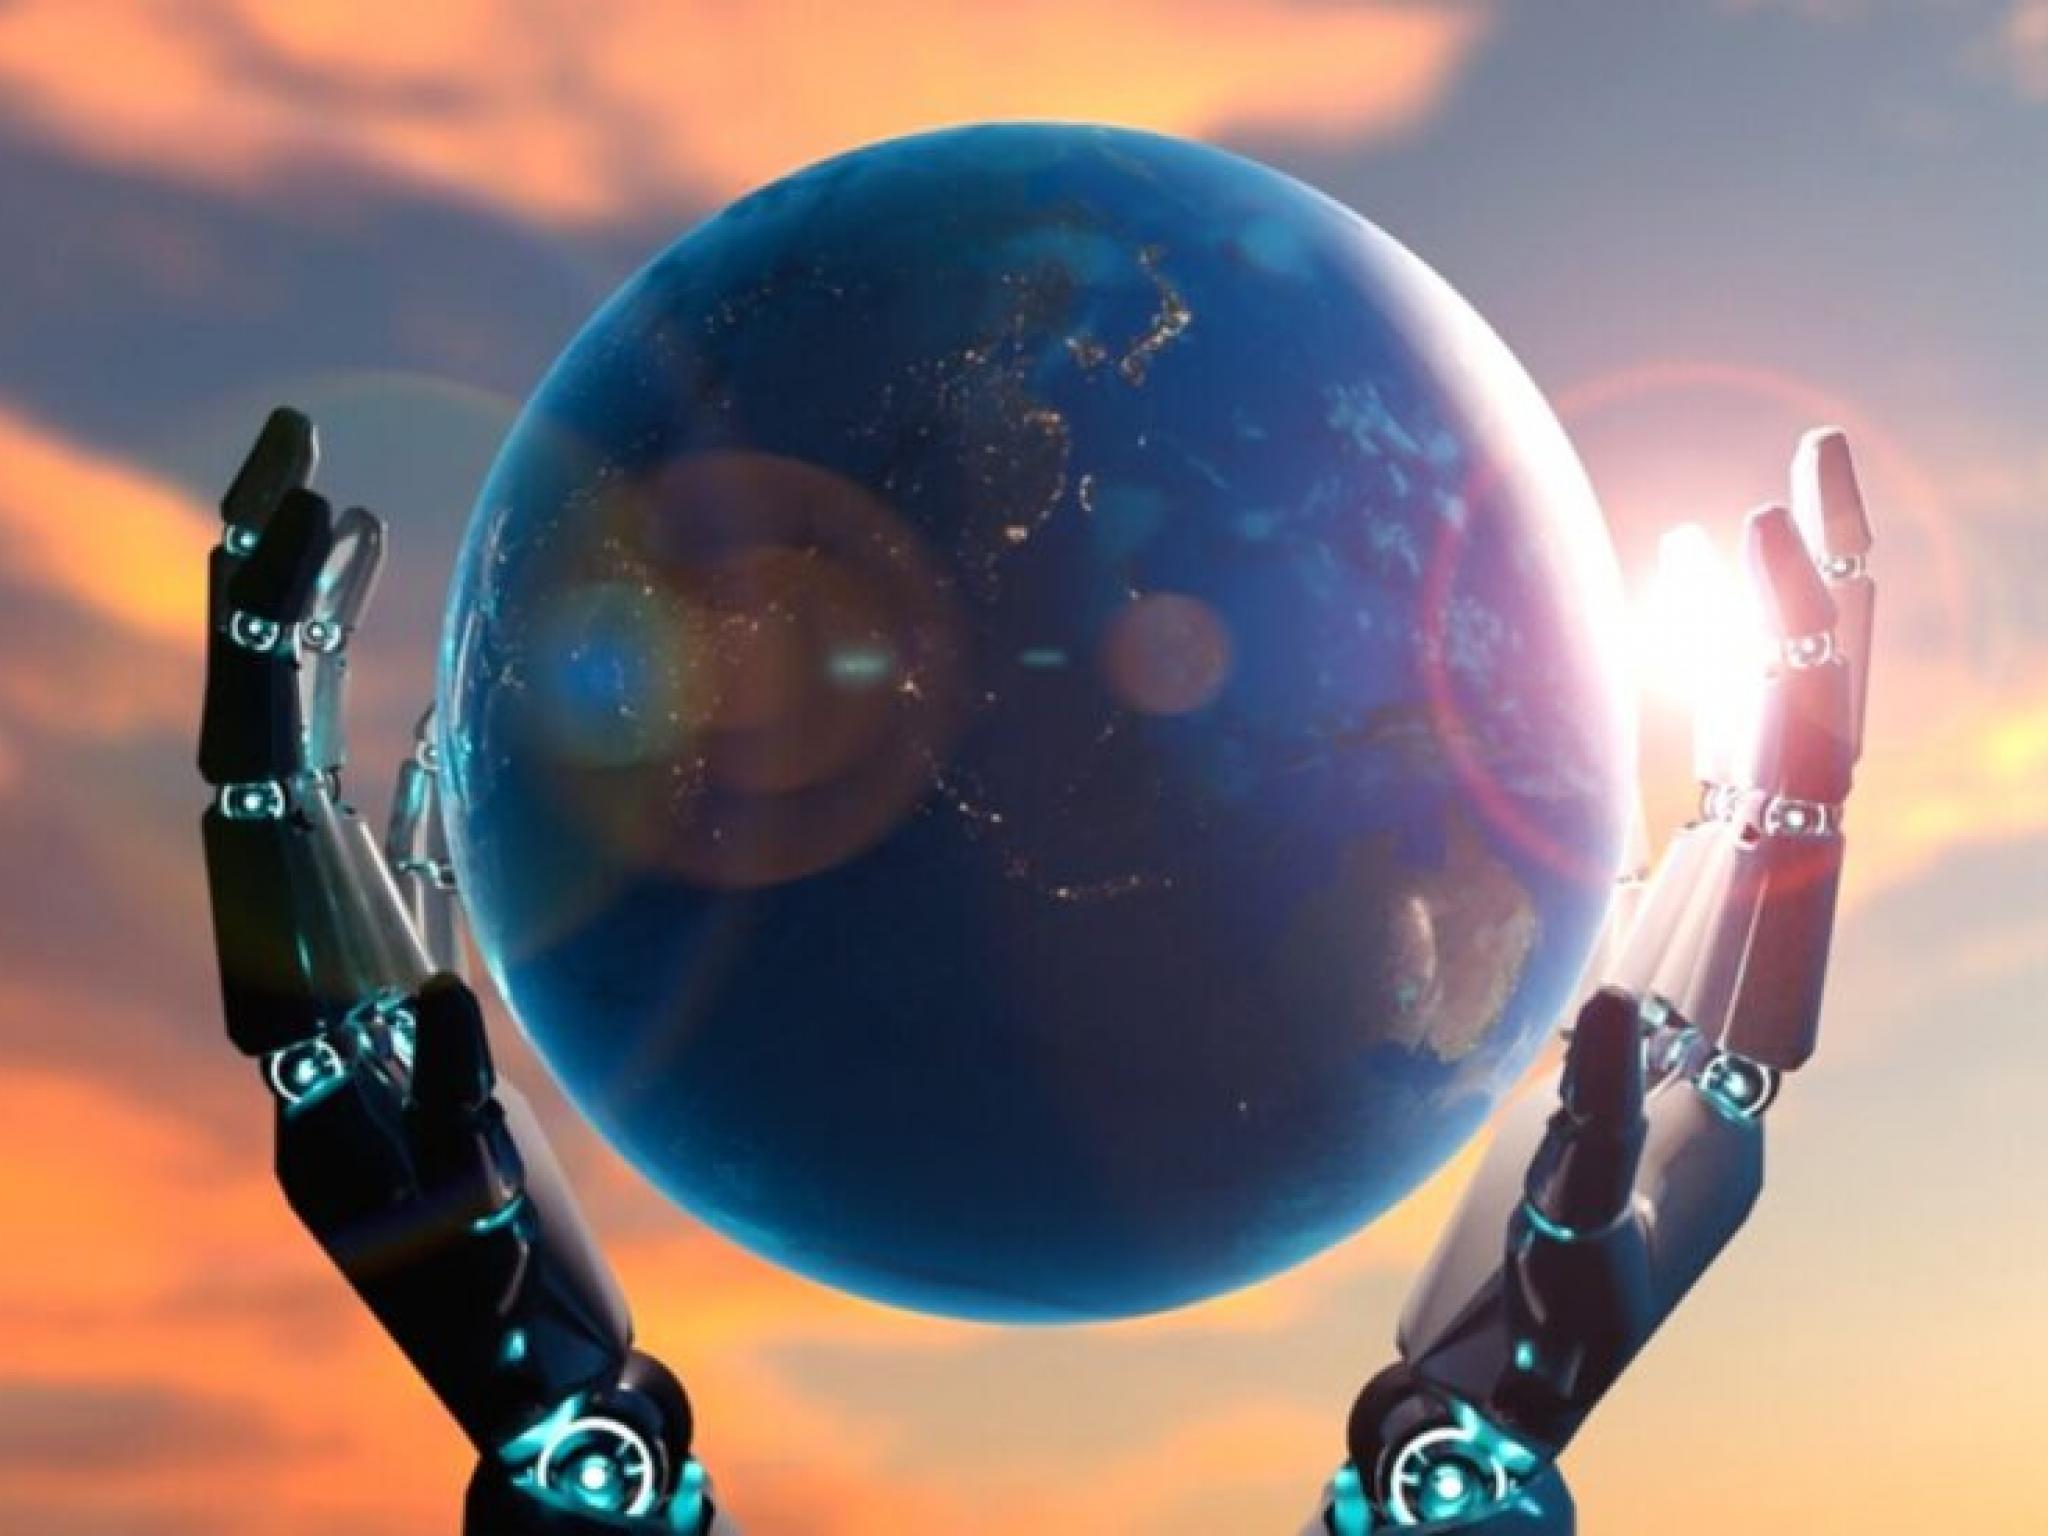  ai-has-the-hallmarks-of-an-inflating-bubble-warns-veteran-wall-street-investor 